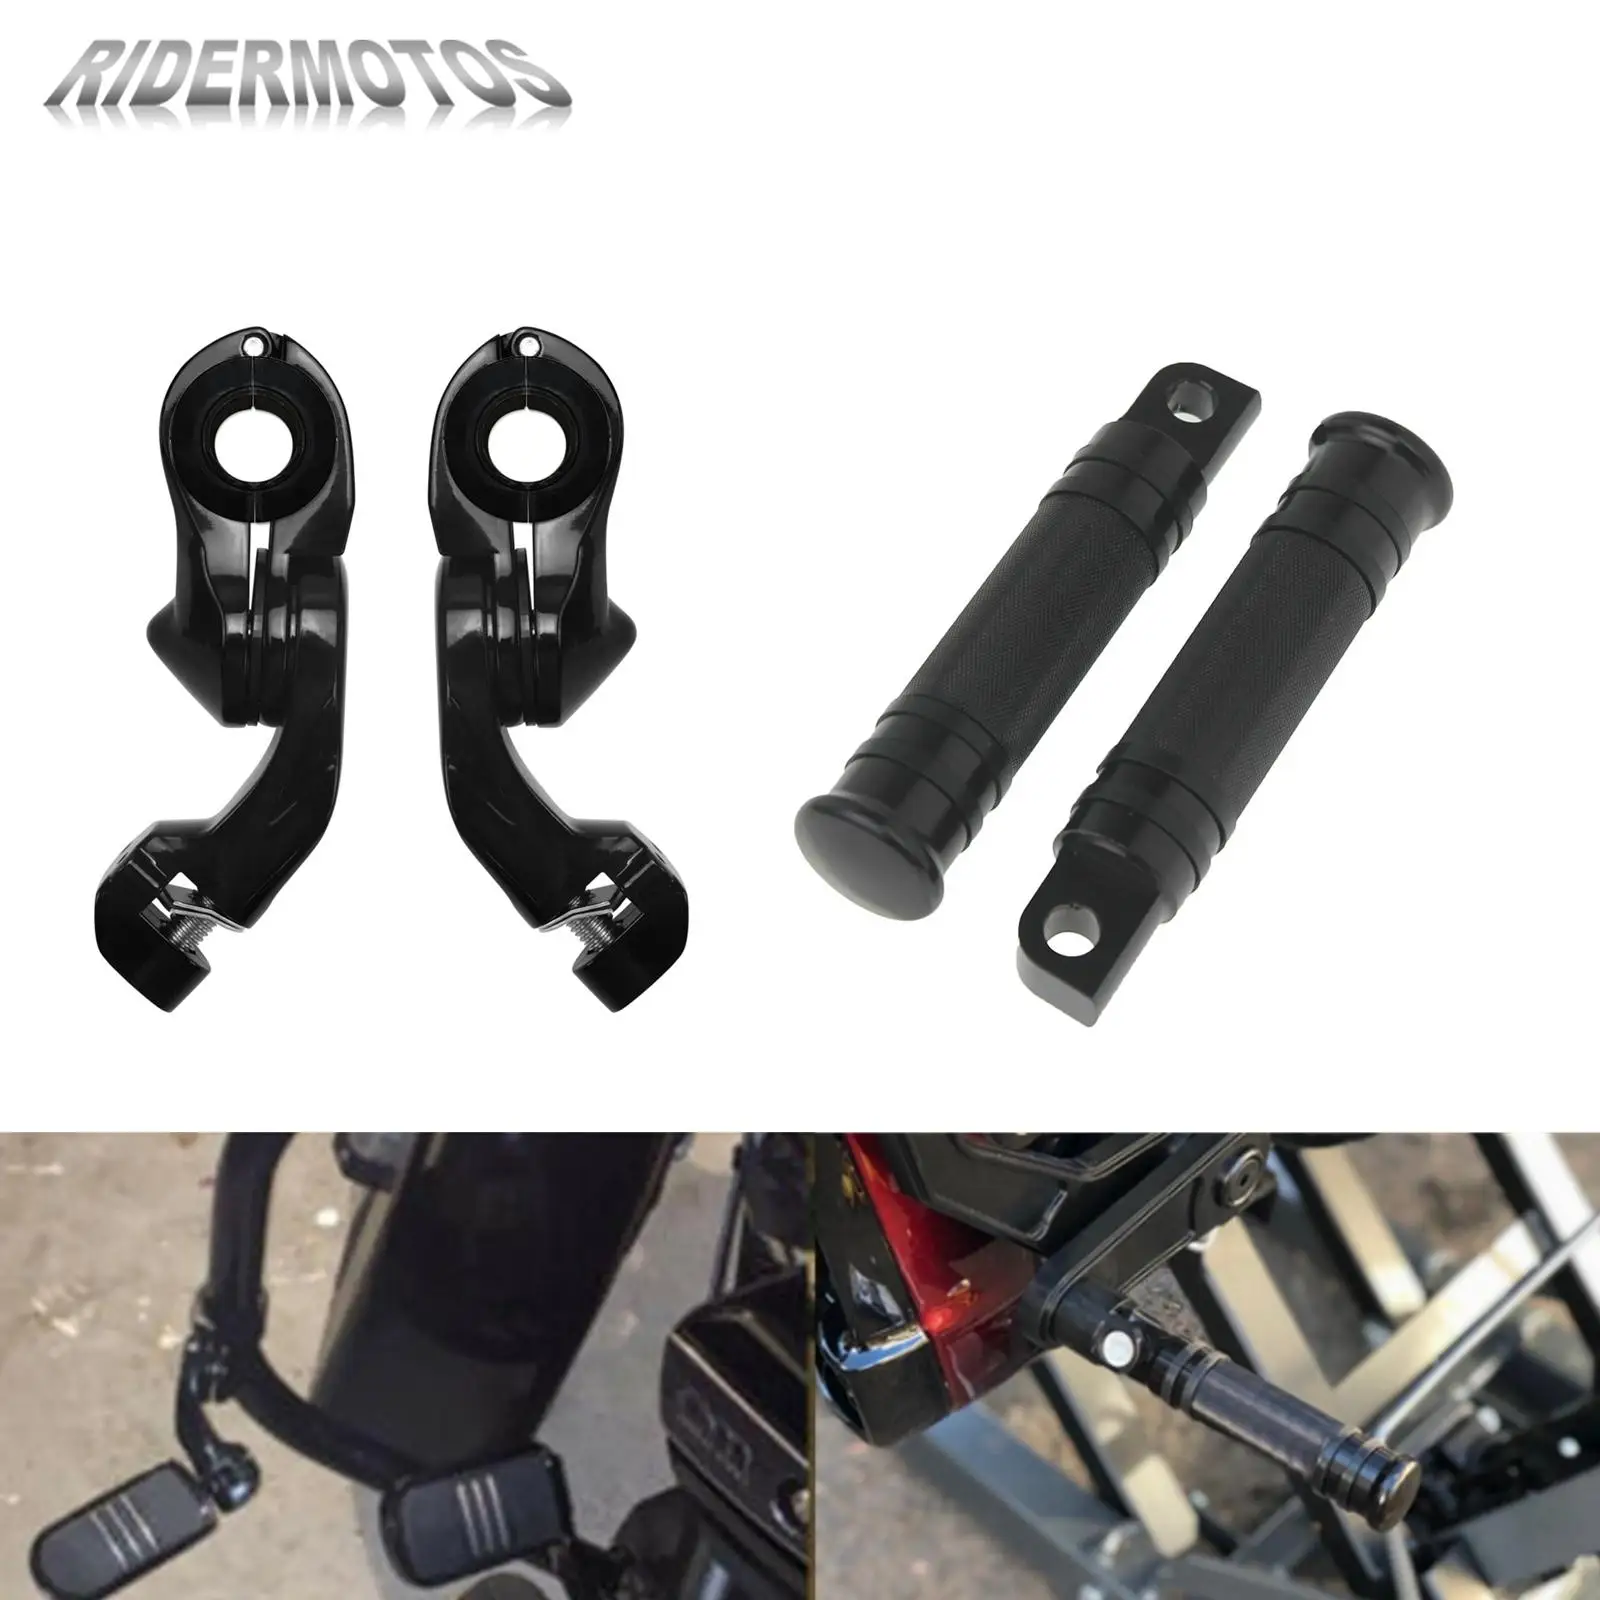 

Motorcycle Passenger Footpeg W/ 1.25" Short Angled Adjustable Foot Rest Pegs Mount For Harley Sportster XL Dyna Touring Softail